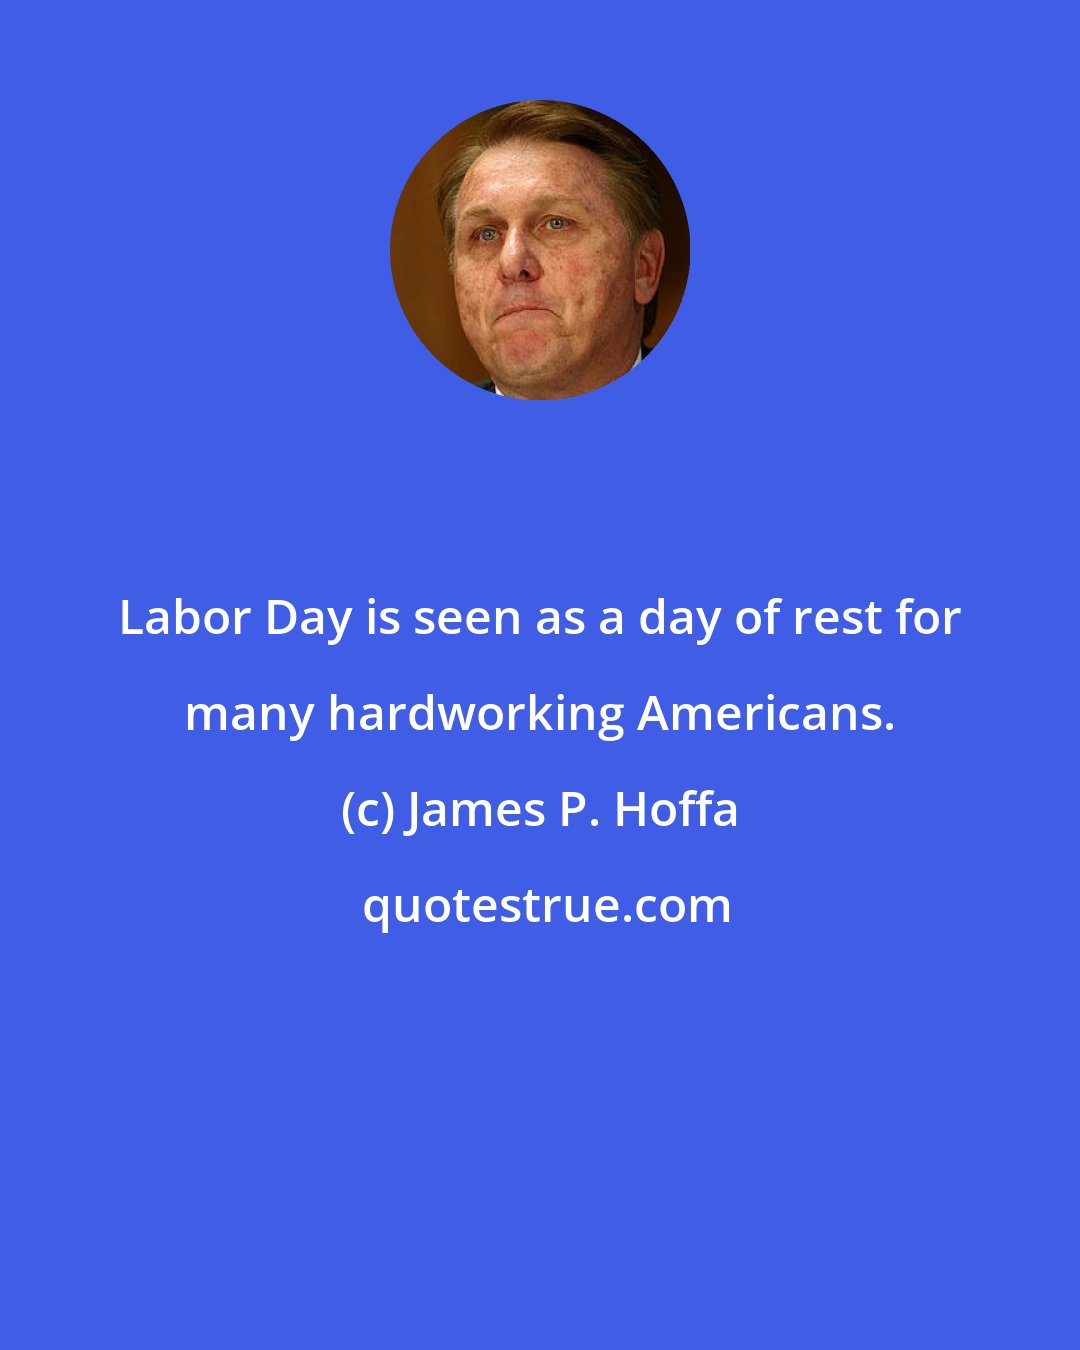 James P. Hoffa: Labor Day is seen as a day of rest for many hardworking Americans.